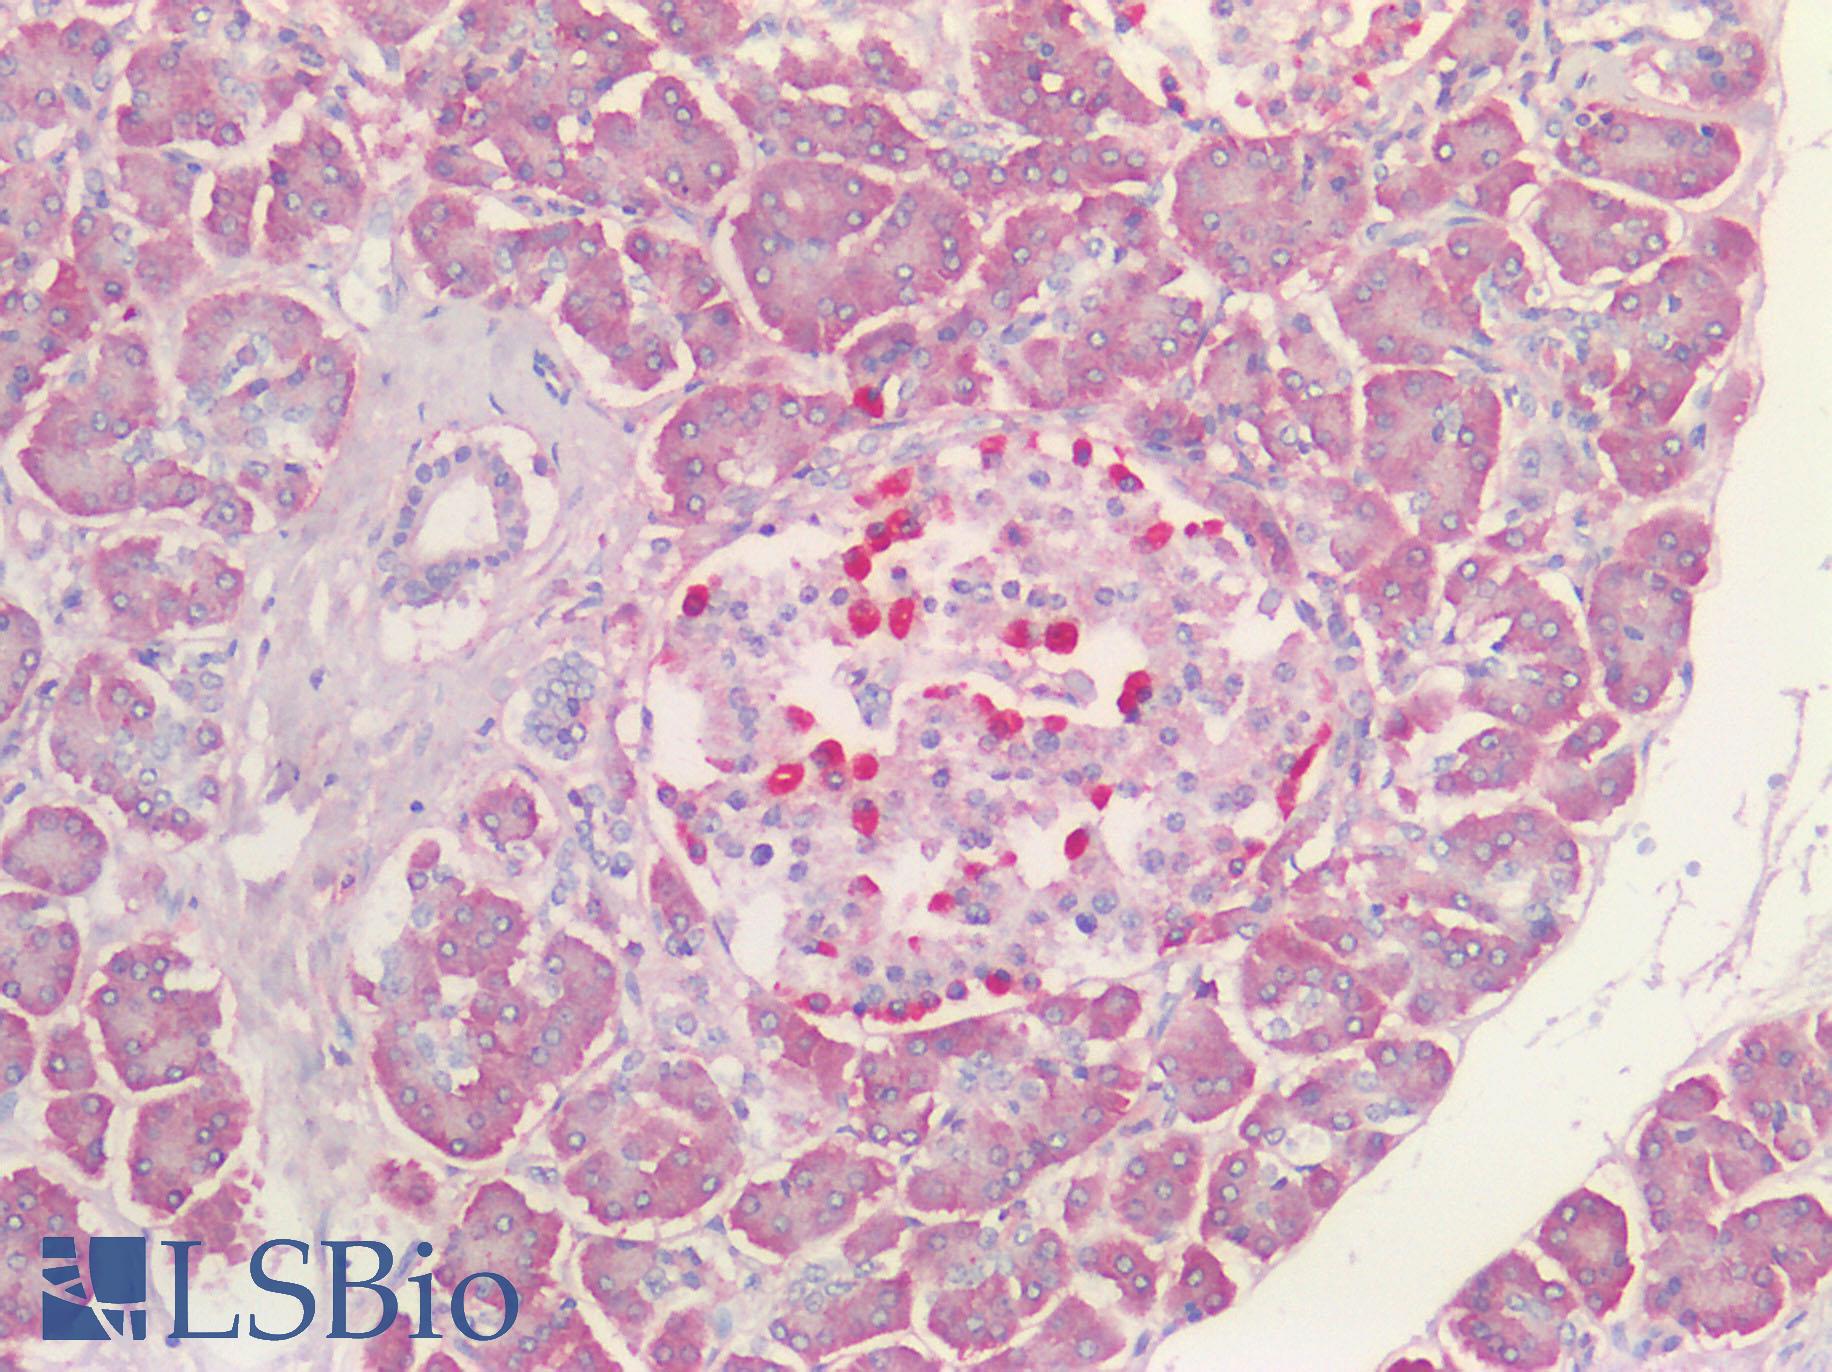 VPS35 Antibody - Human Pancreas: Formalin-Fixed, Paraffin-Embedded (FFPE) HIER using 10 mM sodium citrate buffer pH 6.0